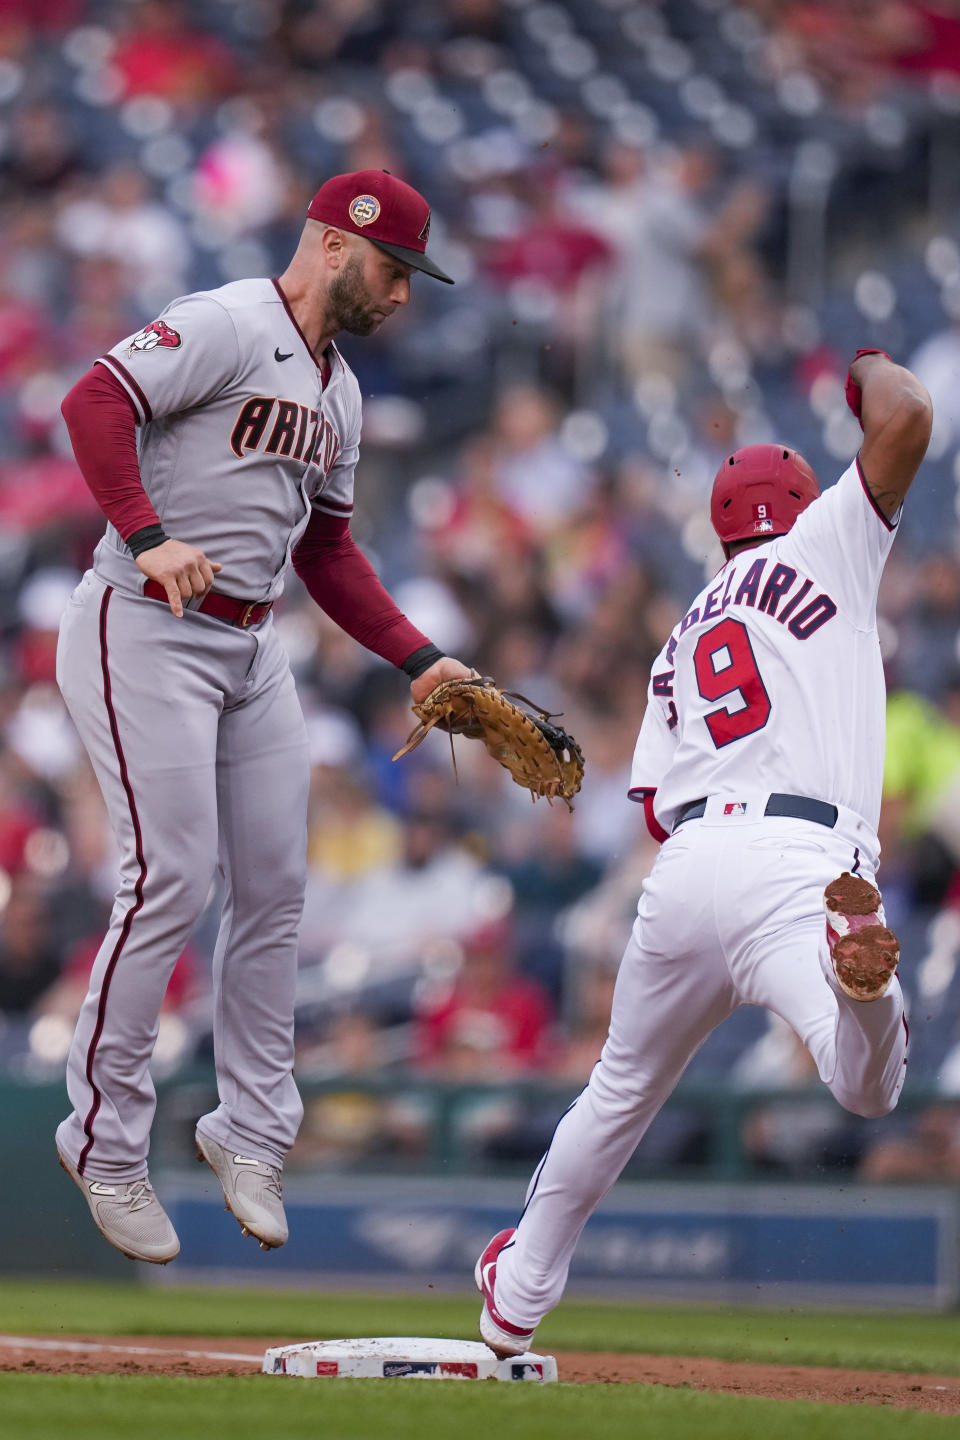 Arizona Diamondbacks first baseman Christian Walker (53) can't make the tag on Washington Nationals' Jeimer Candelario (9), who was safe at first base, during the first inning of a baseball game at Nationals Park, Wednesday, June 7, 2023, in Washington. (AP Photo/Alex Brandon)